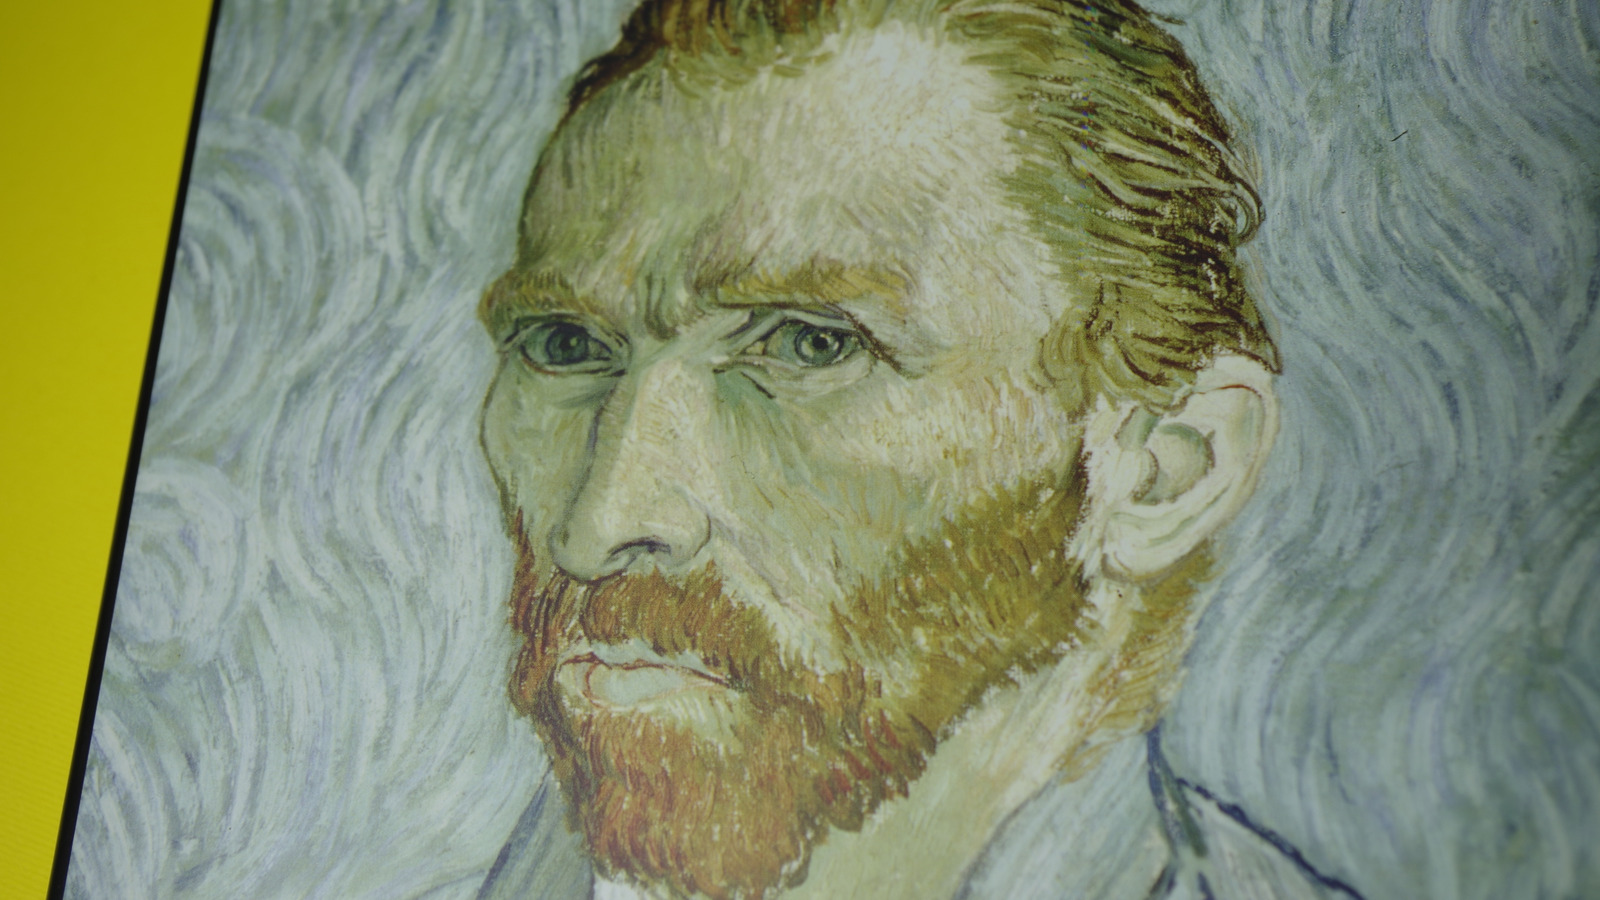 Small Details You Missed In Vincent Van Gogh's Most Famous Paintings